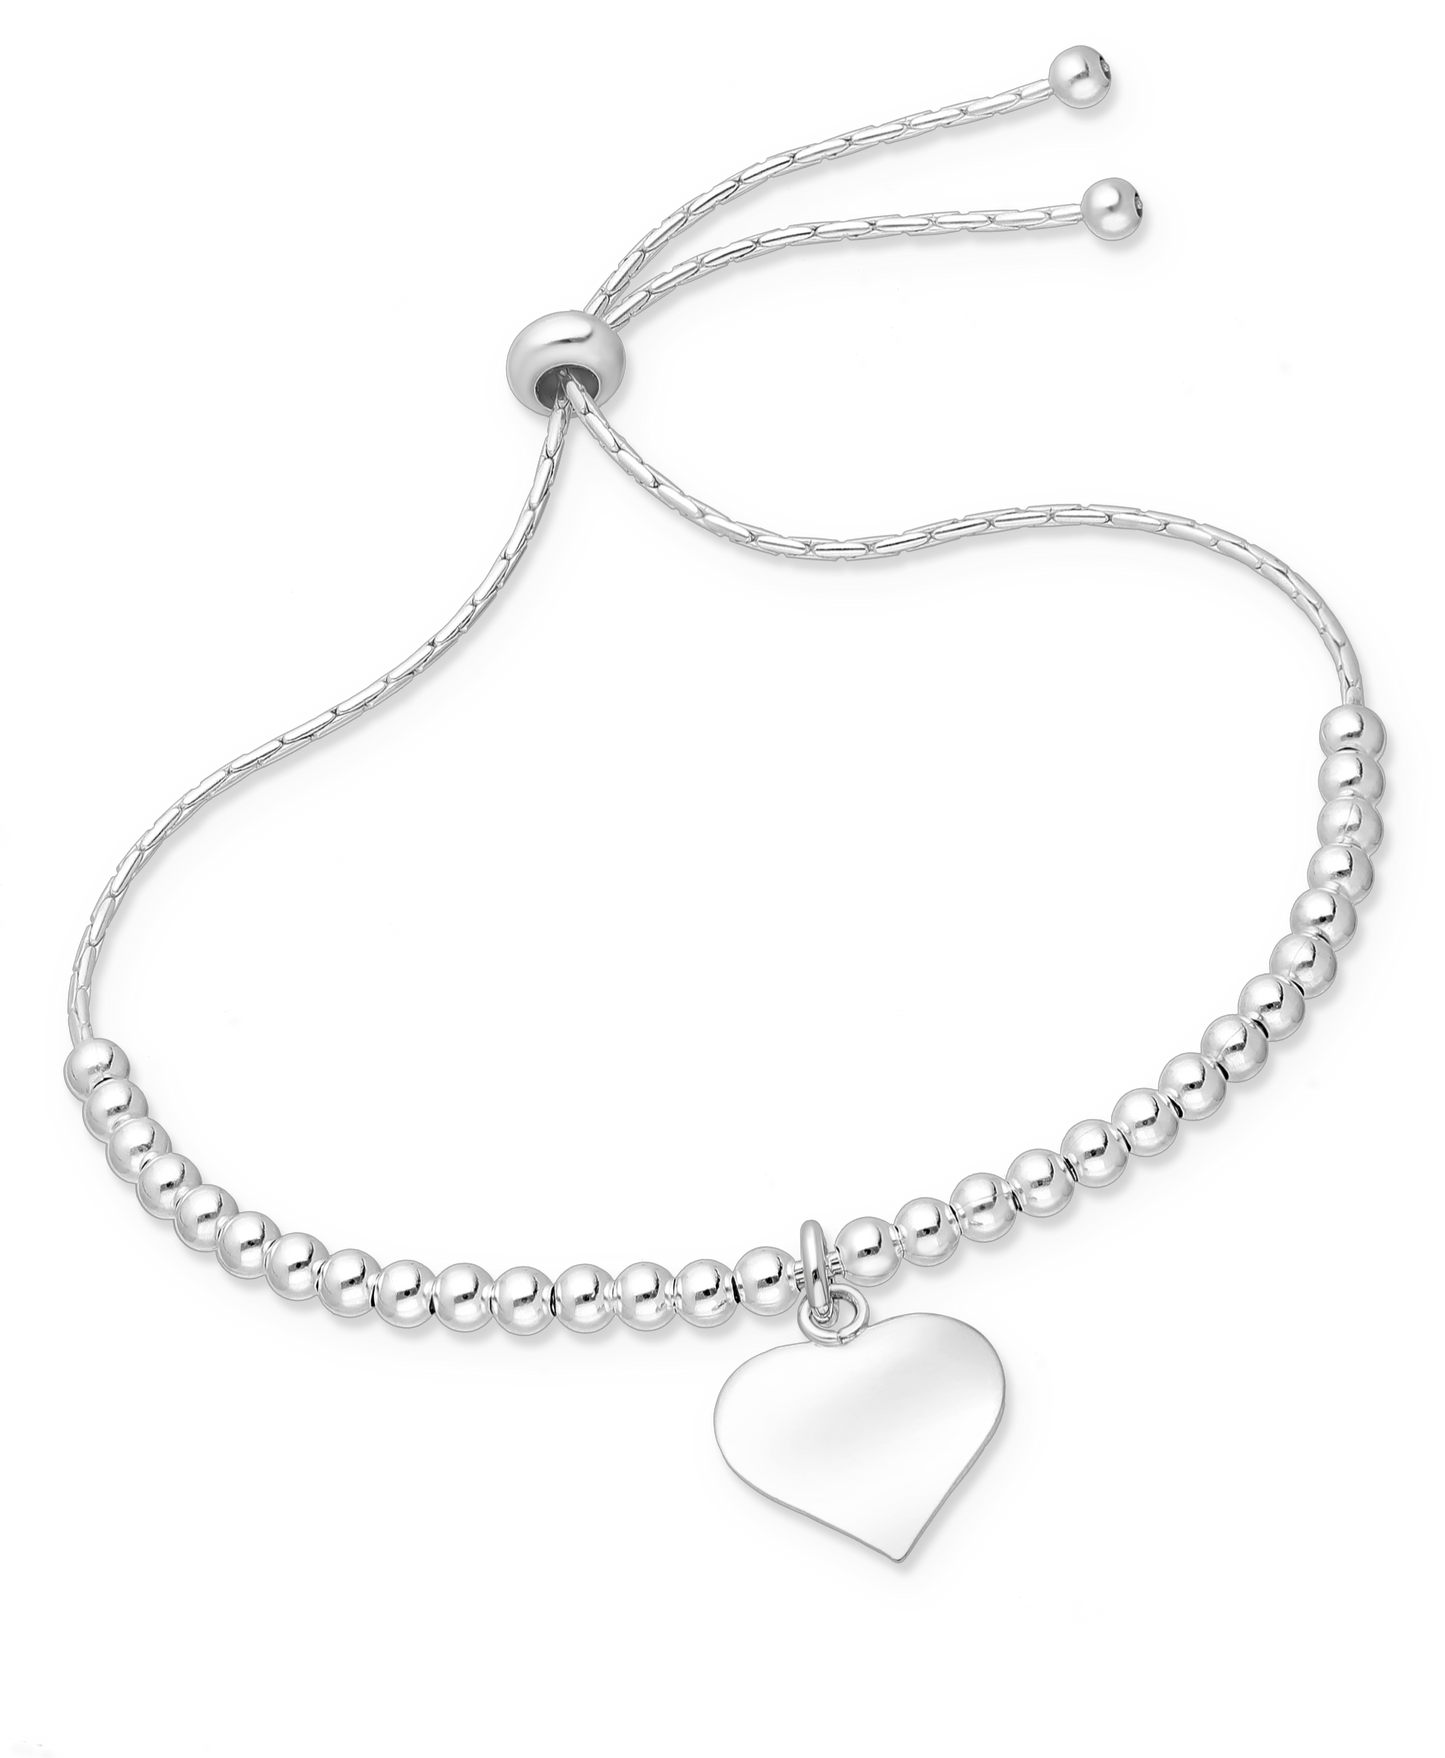 Sterling Silver Ball Adjustable Slider Bracelet with Oxidized Heart Charm